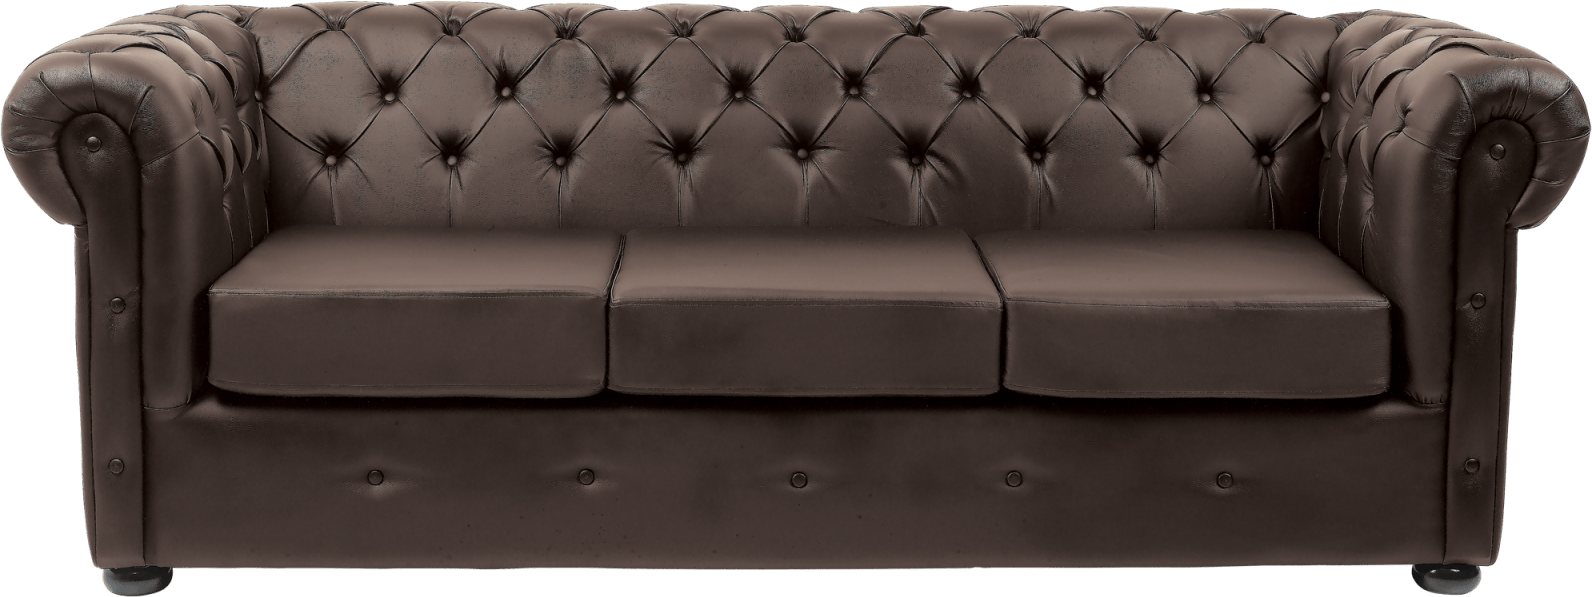 Chesterfield 3 Seater Sofa Lounge